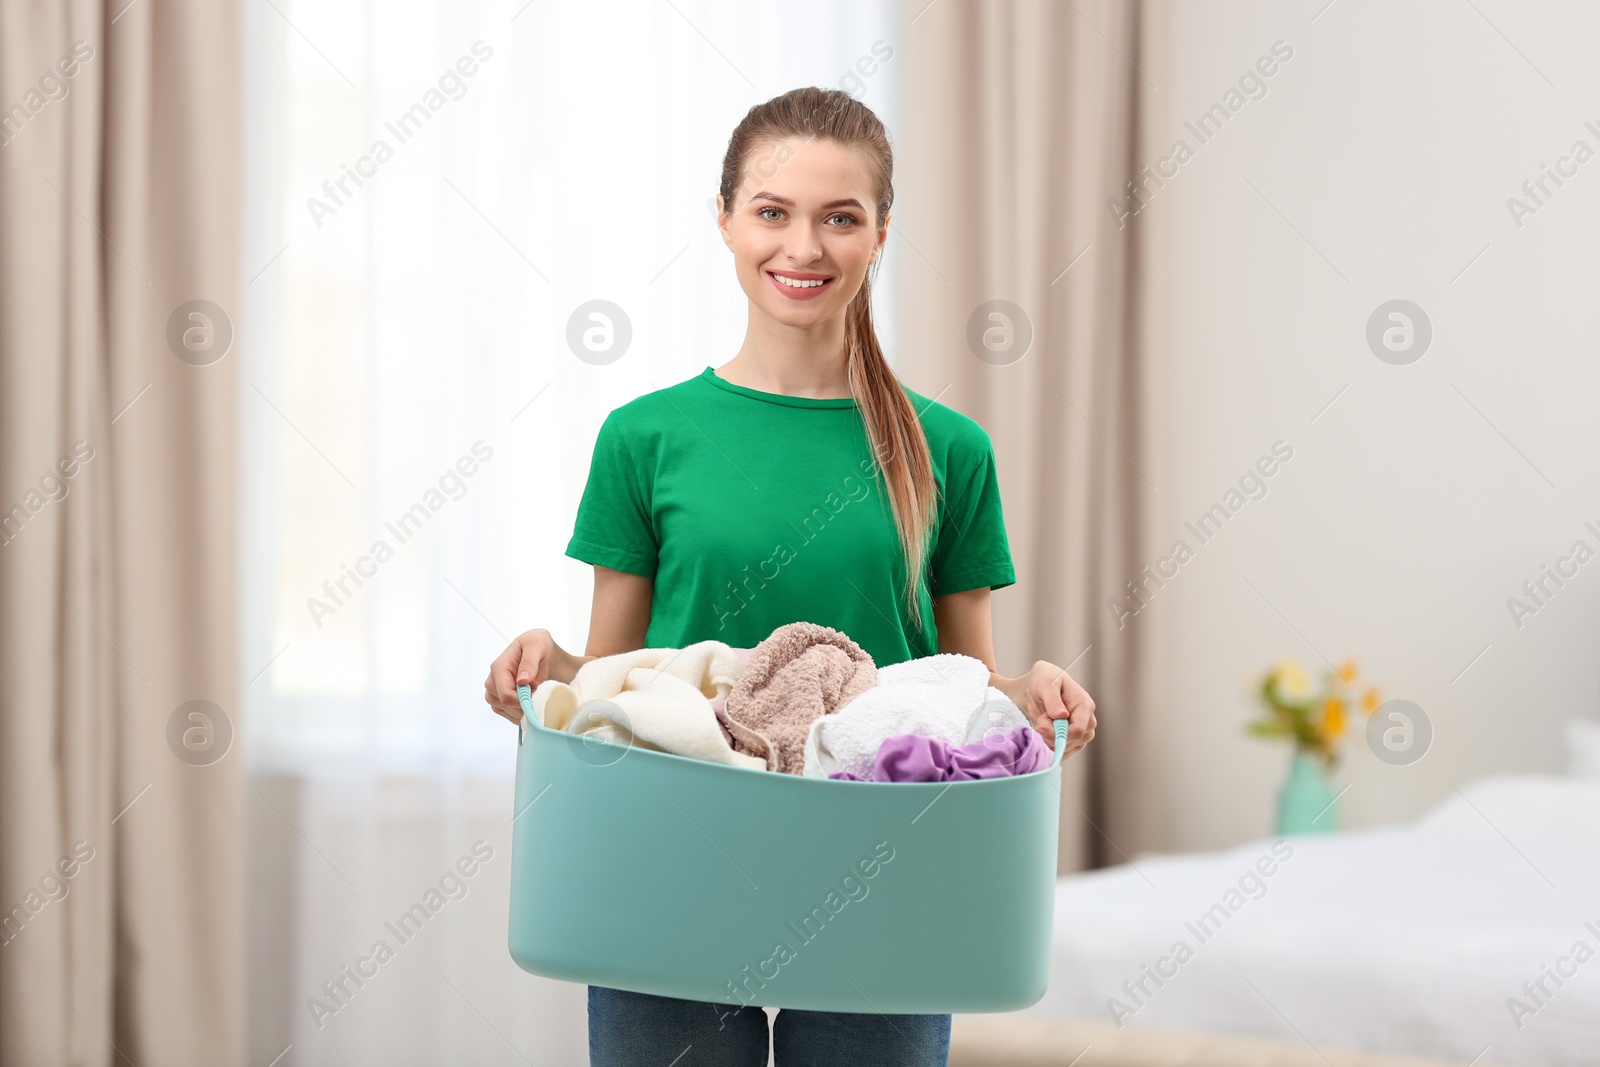 Photo of Woman holding plastic basket with dirty laundry indoors